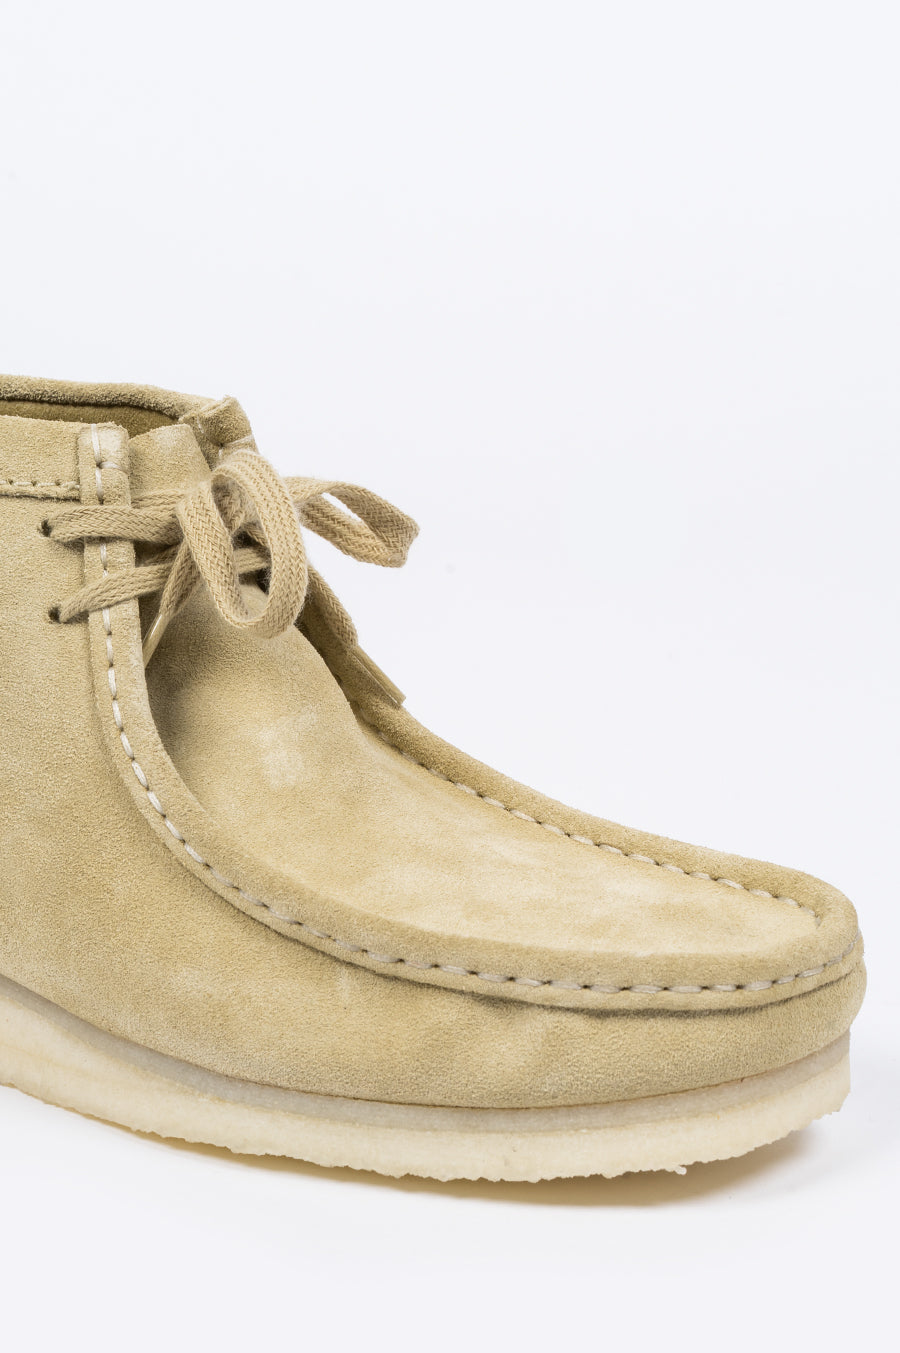 CLARKS WALLABEE BOOT MAPLE - BLENDS